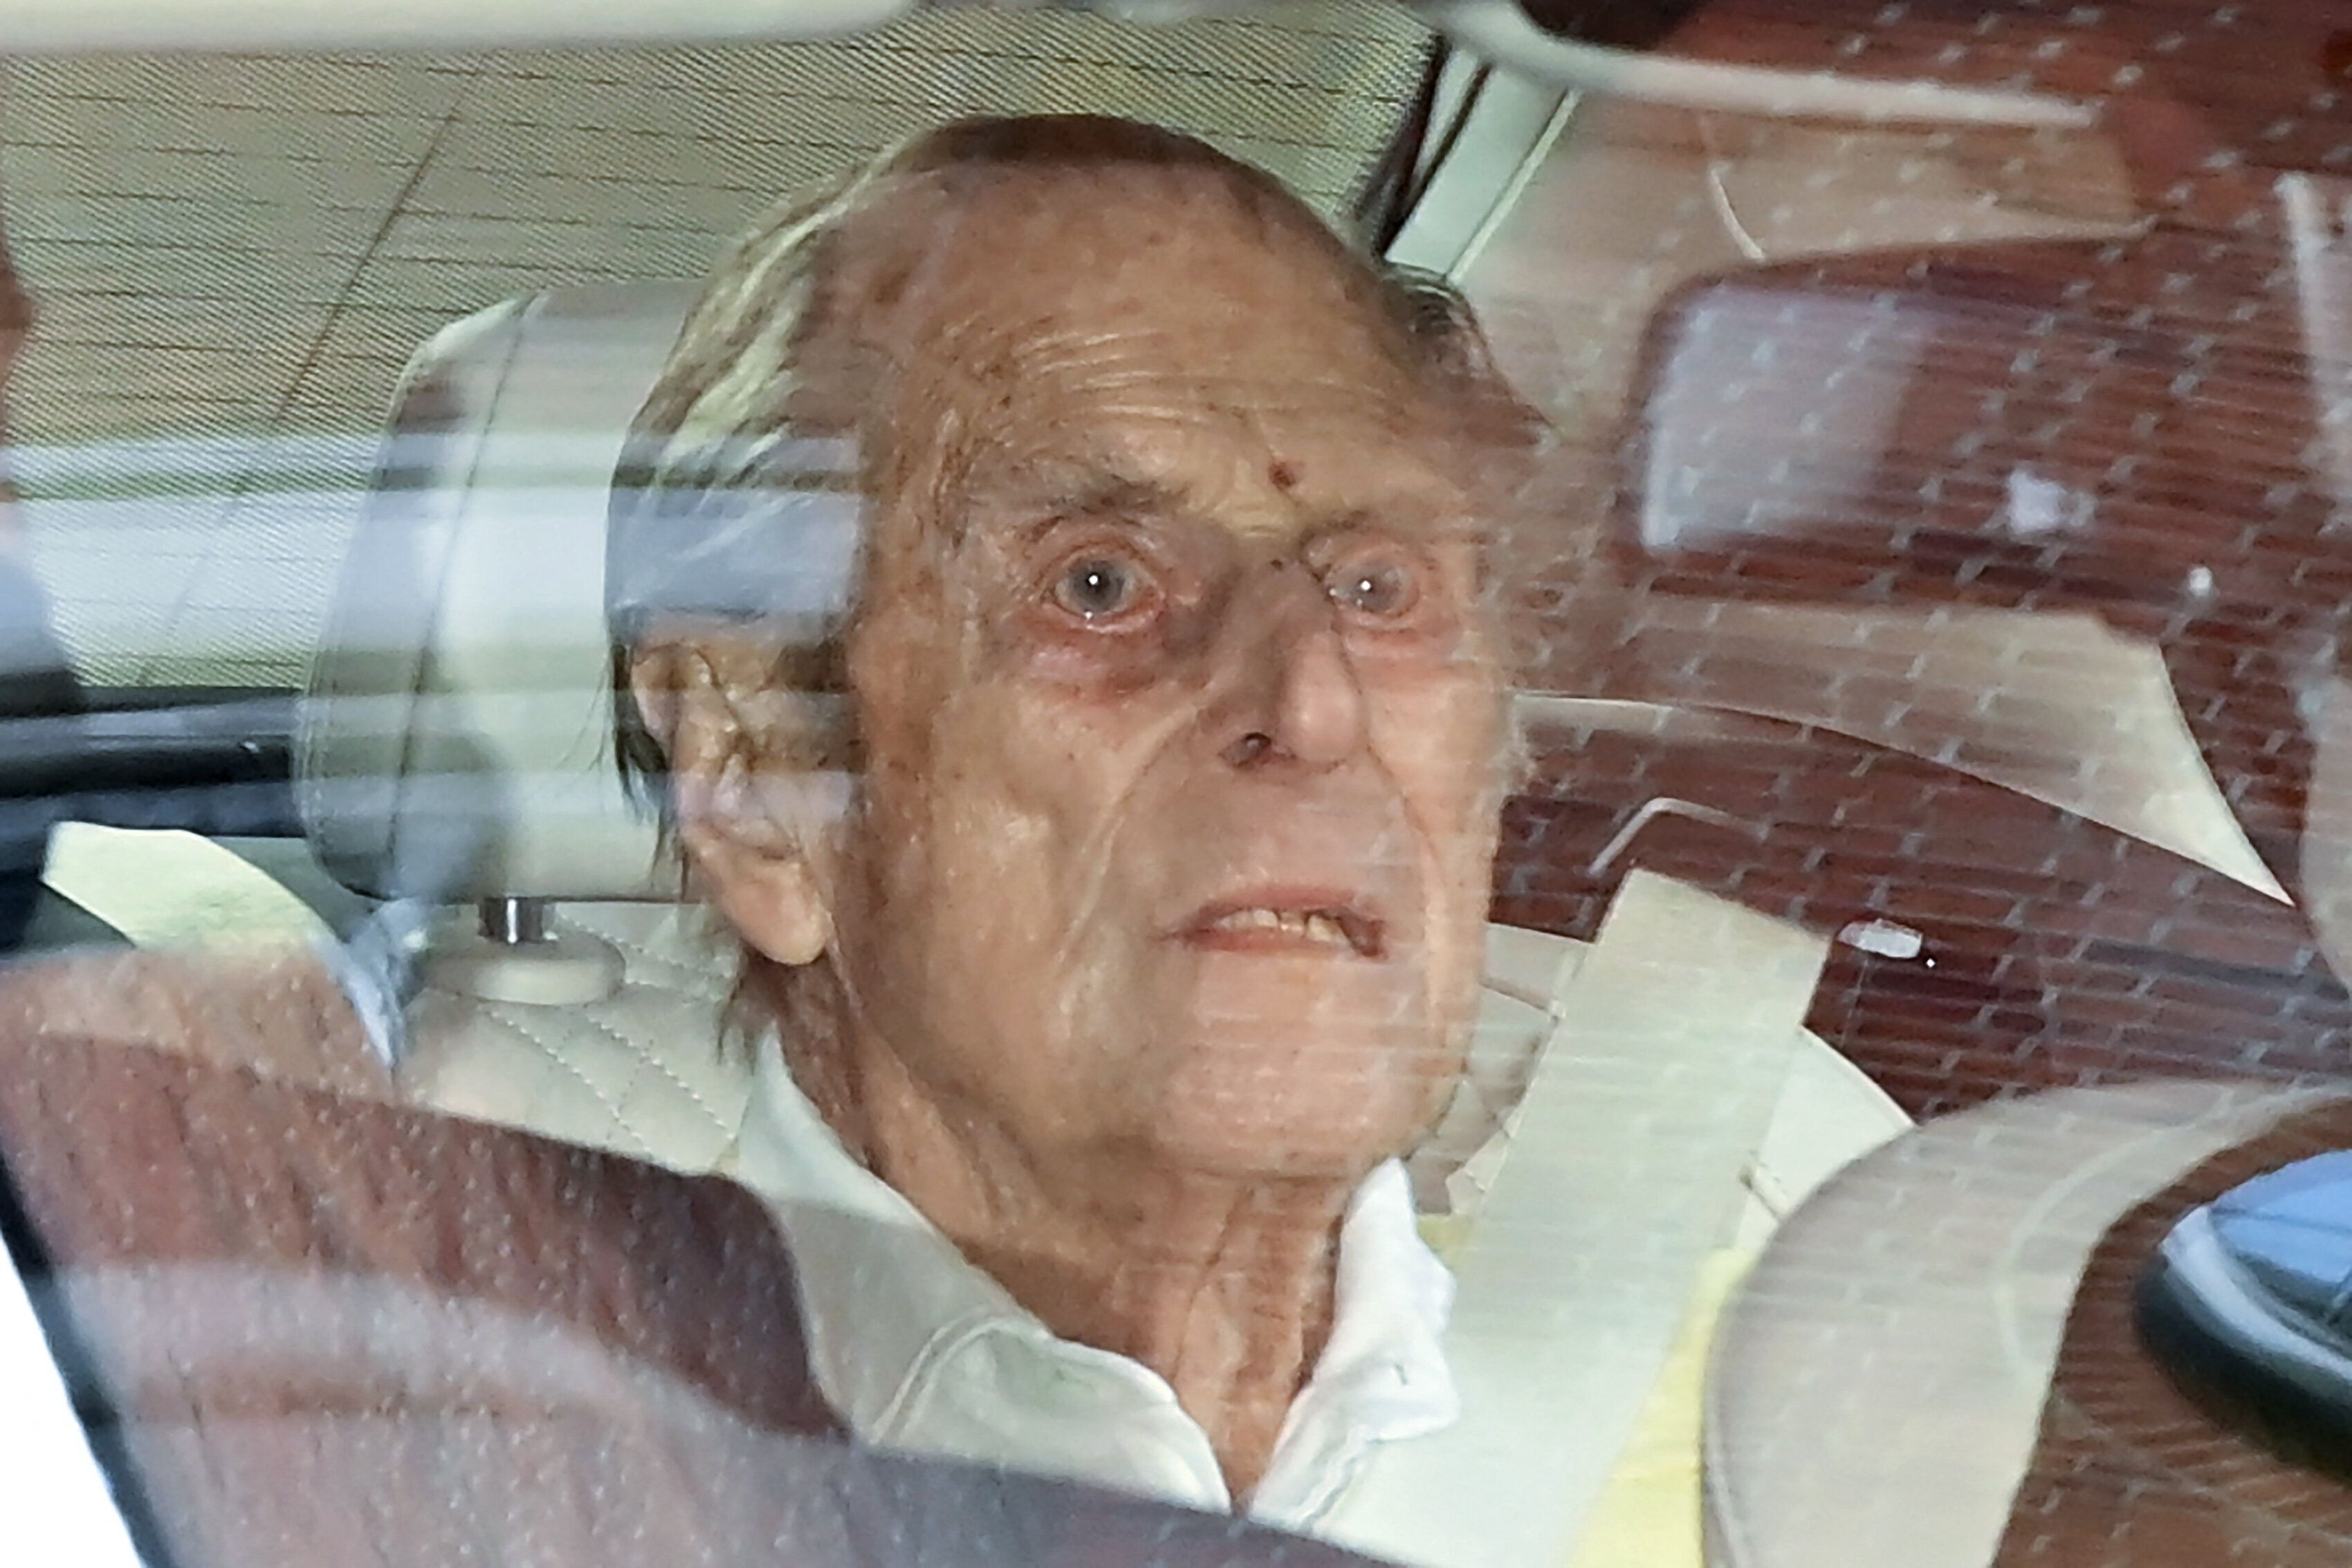 Prince Philip leaves King Edward VII's Hospital in central London on March 16, 2021.